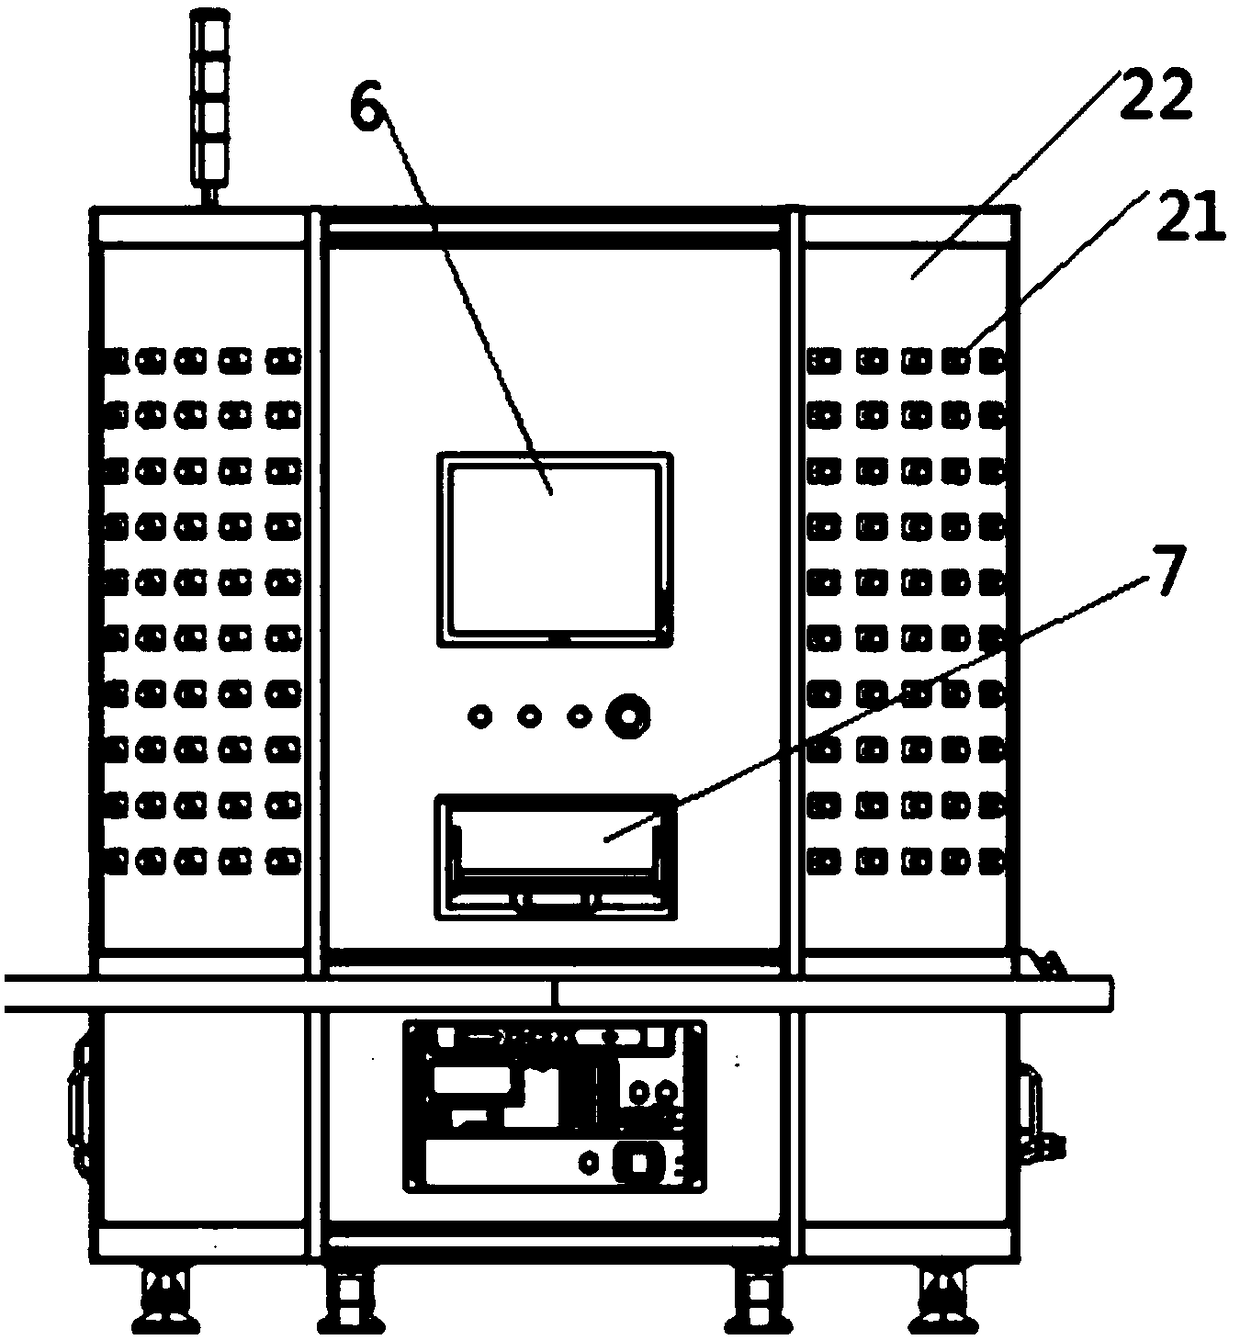 Bullet marking and sorting device